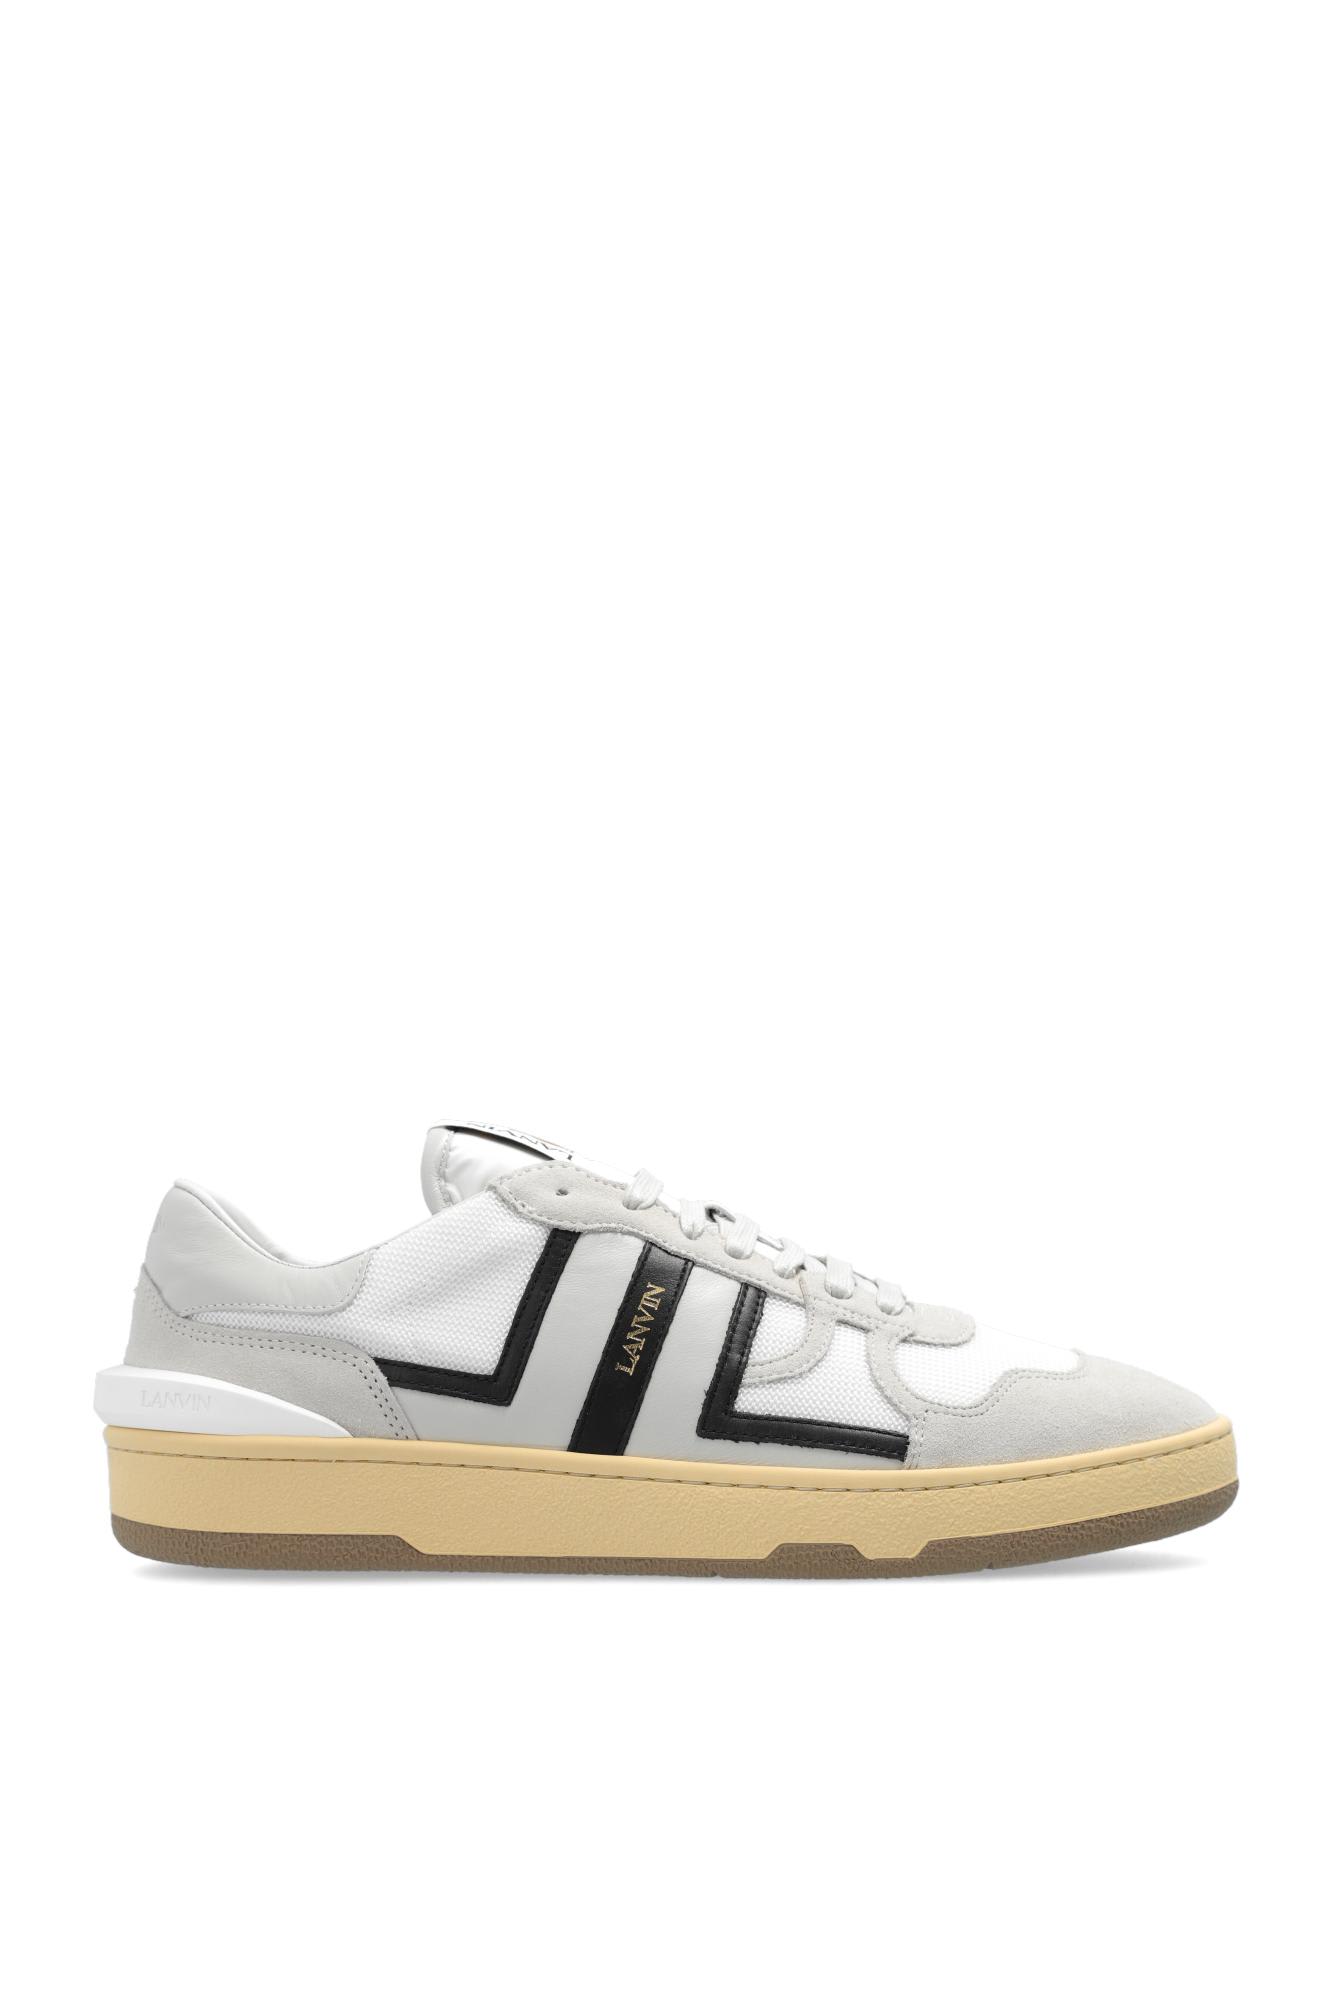 Lanvin Clay Low Trainers In Black/off White